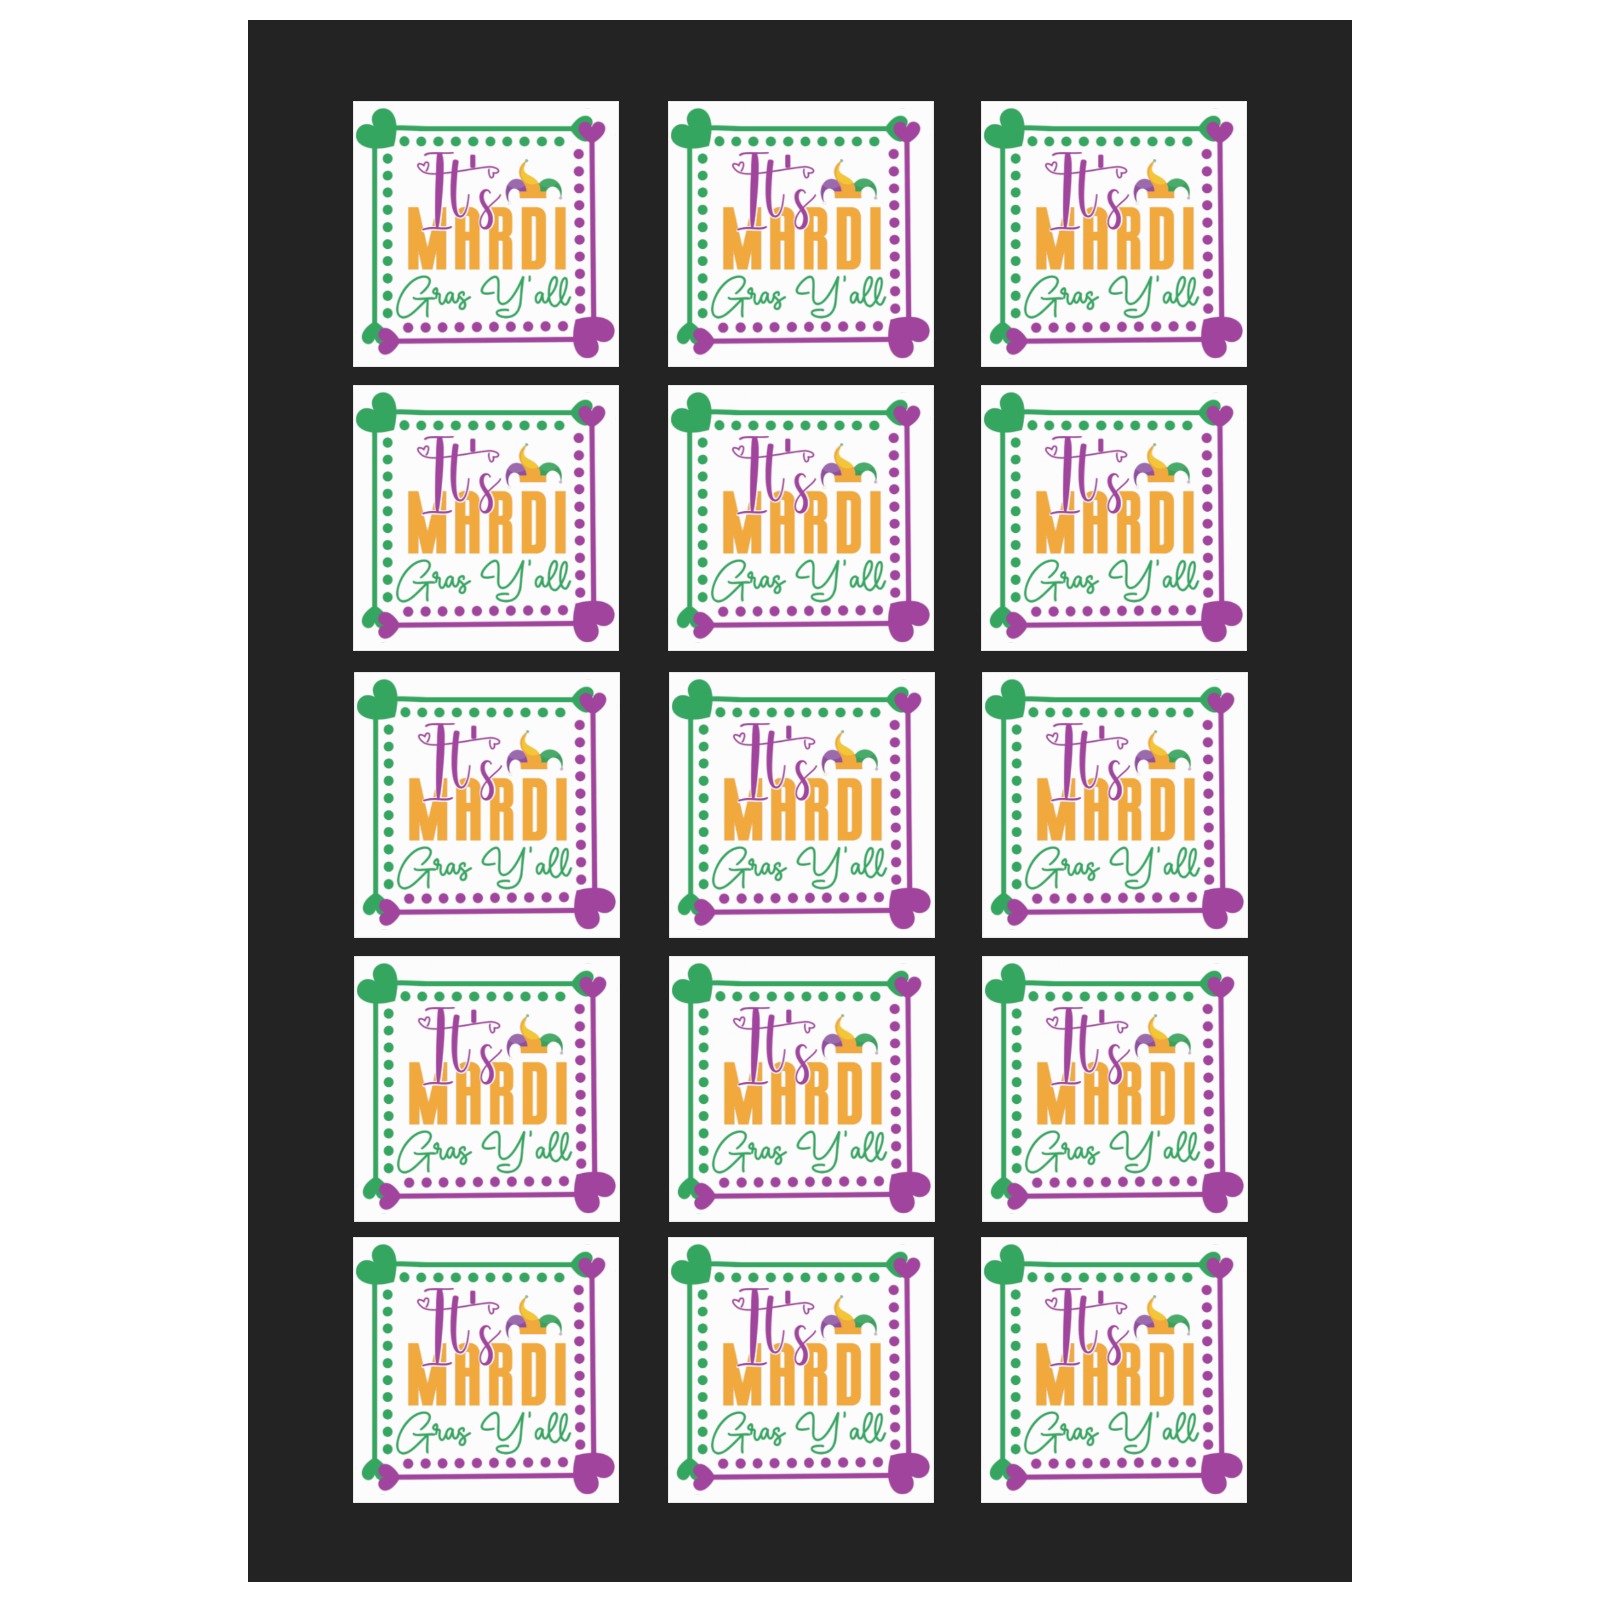 It's Mardi Gras Y'all Personalized Temporary Tattoo (15 Pieces)